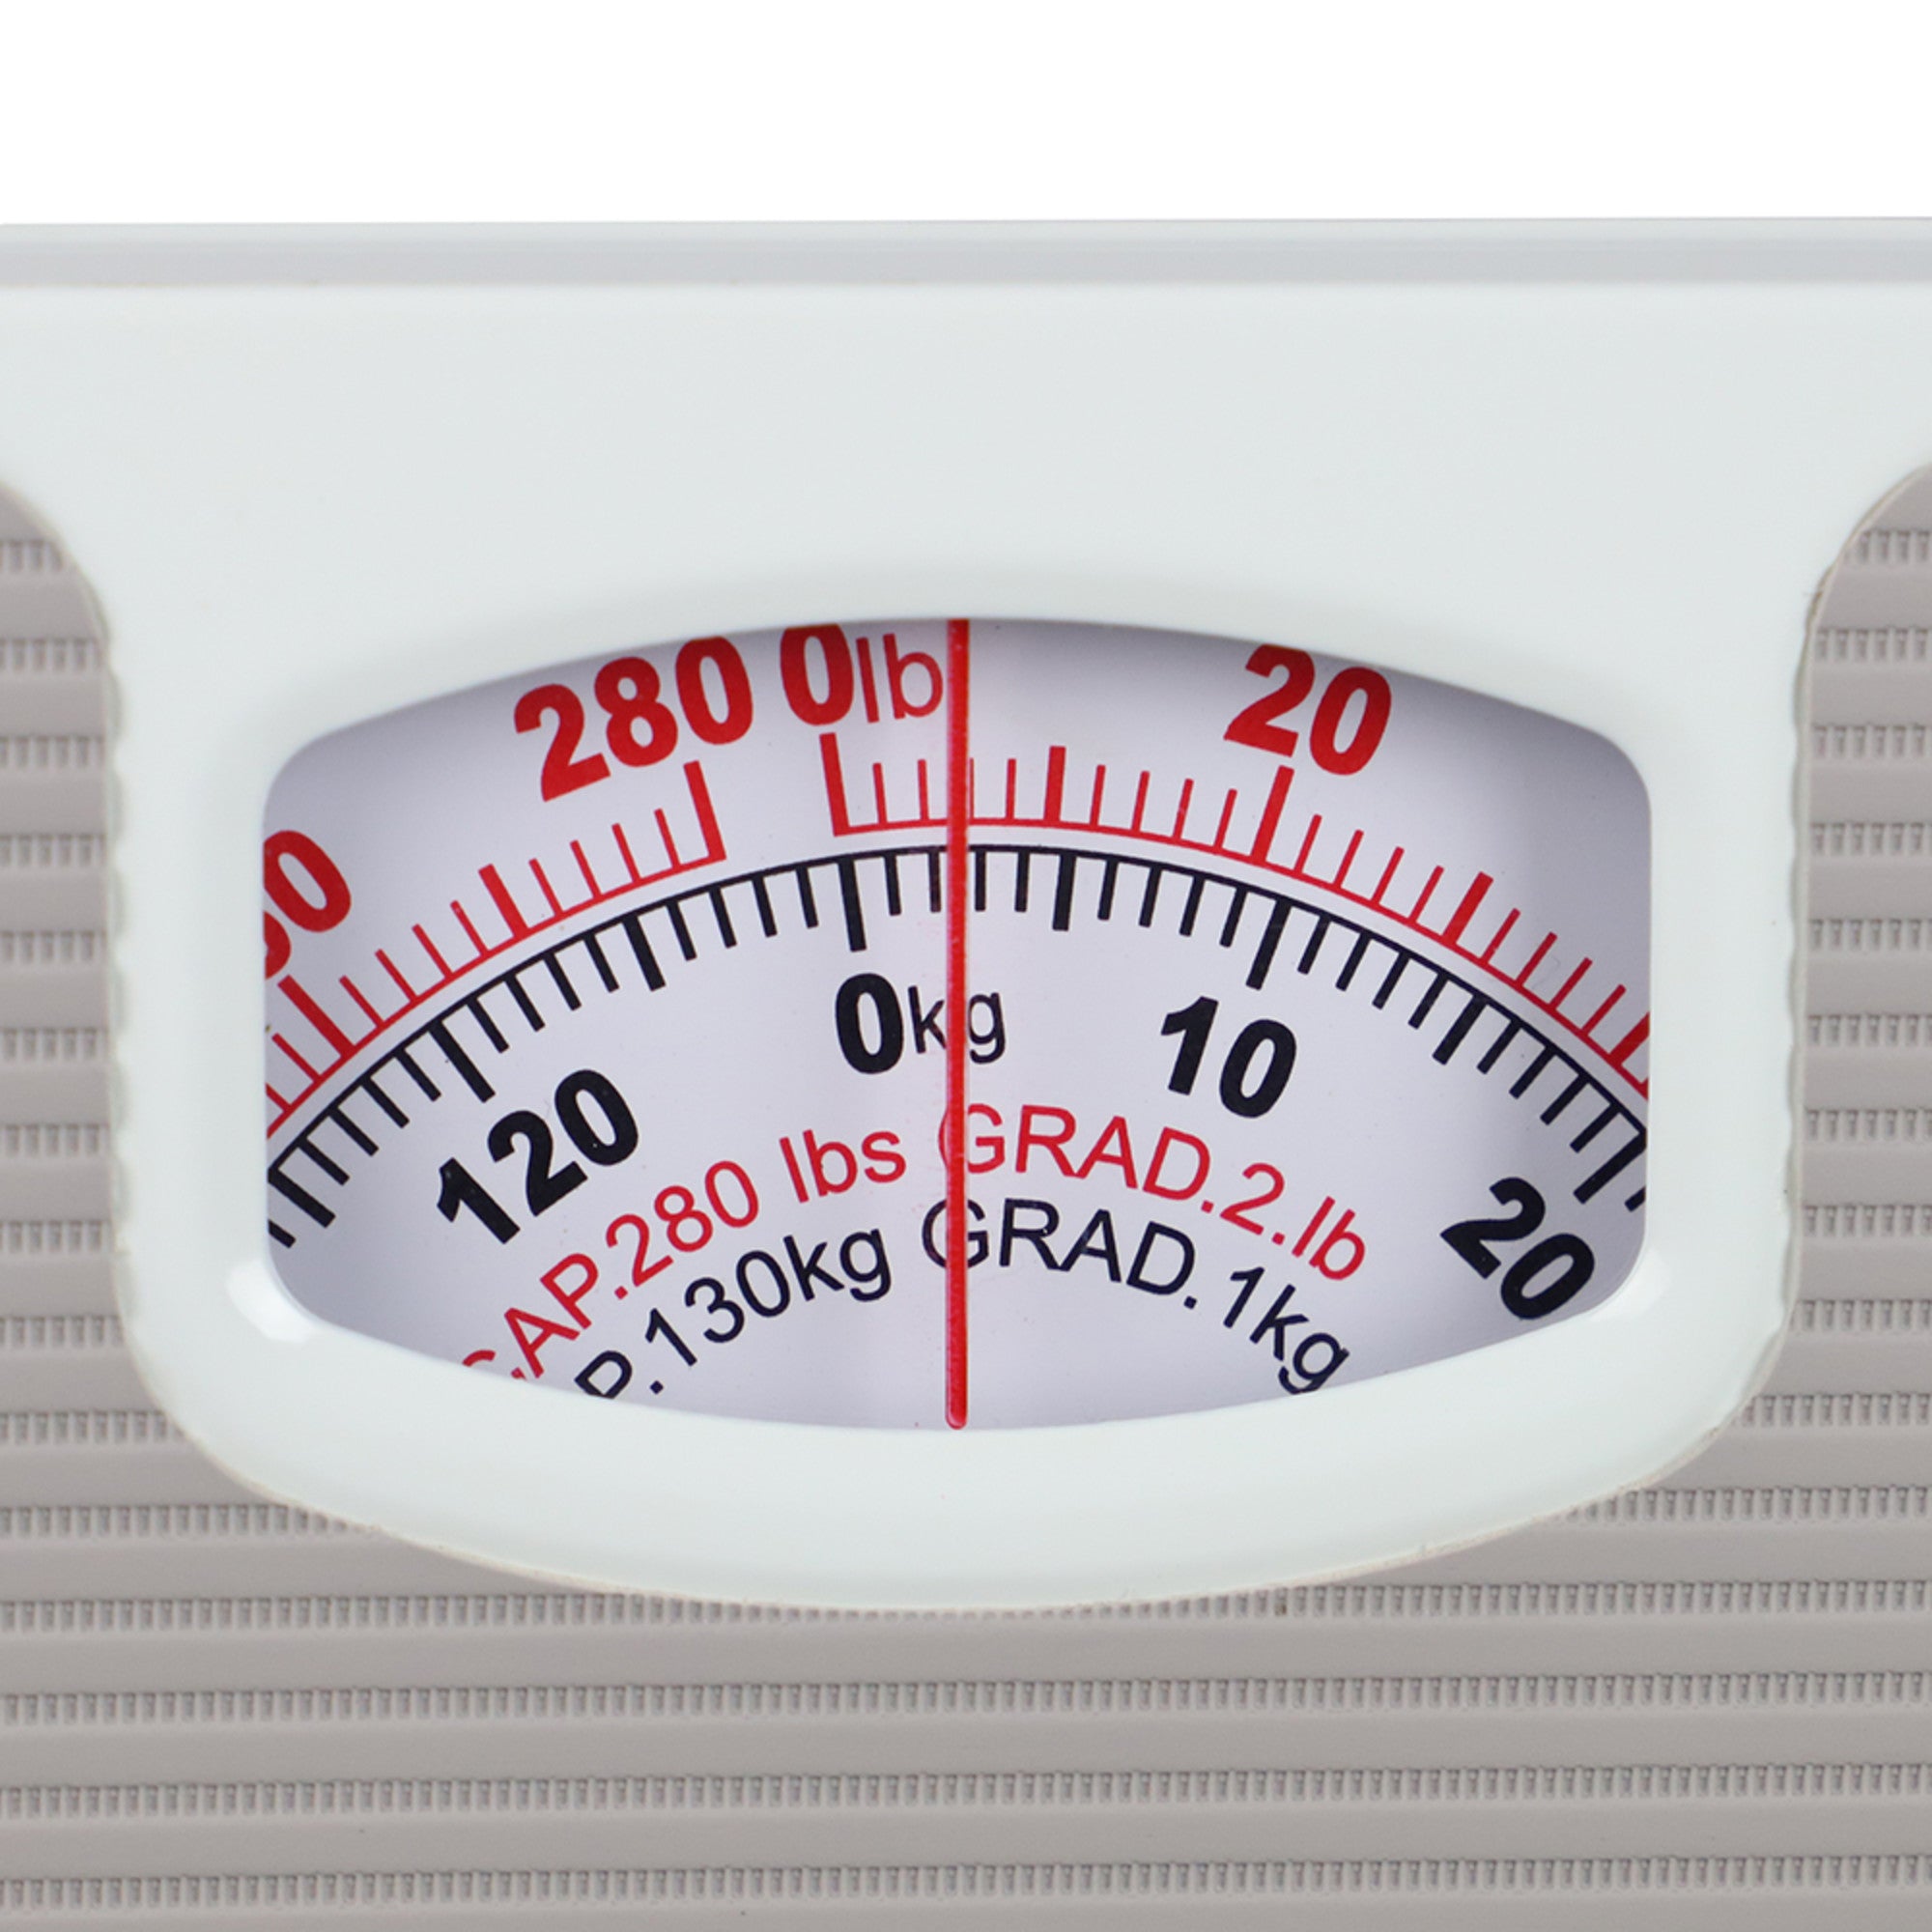 Shop Mechanical Bathroom Scales & Analogue Scales